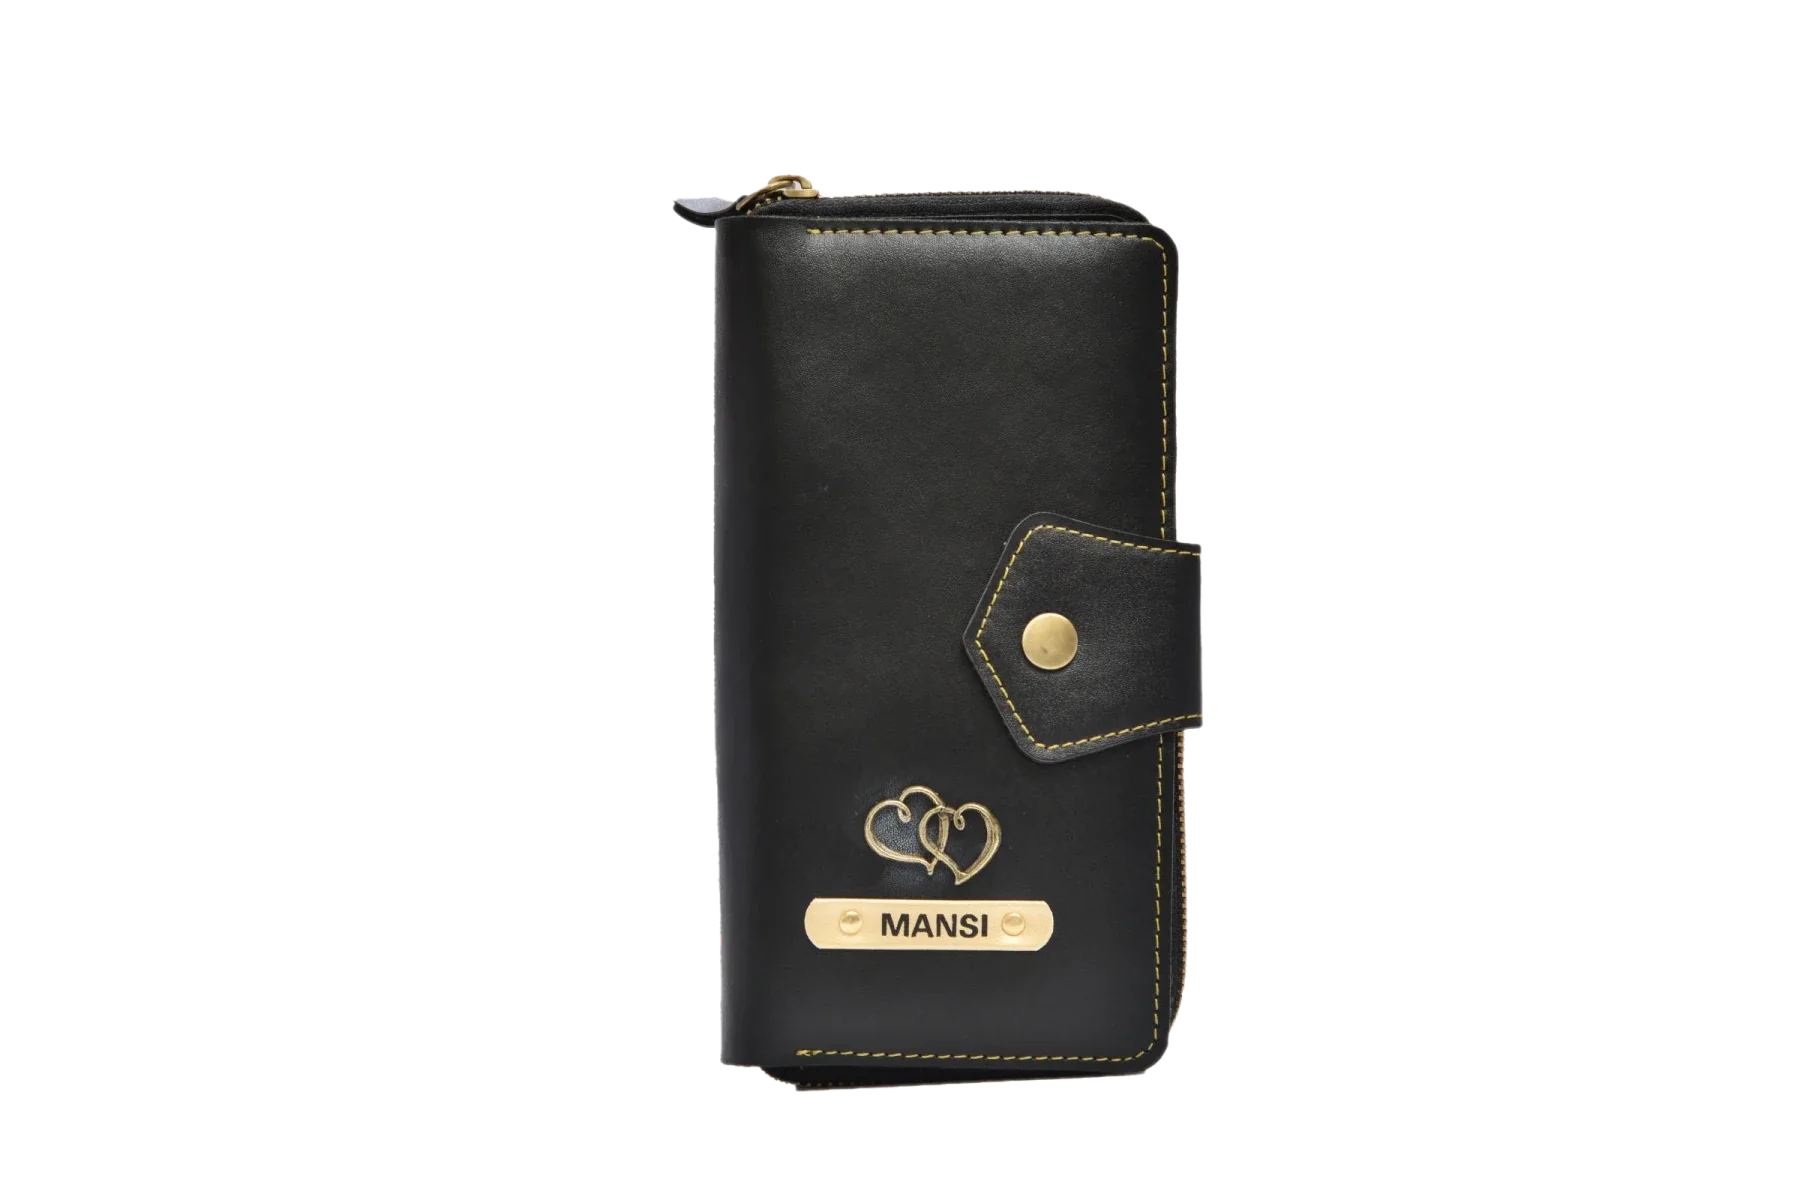 This zip around lady wallet is made of high-quality leather and comes with ample storage for cards, cash, and coins.